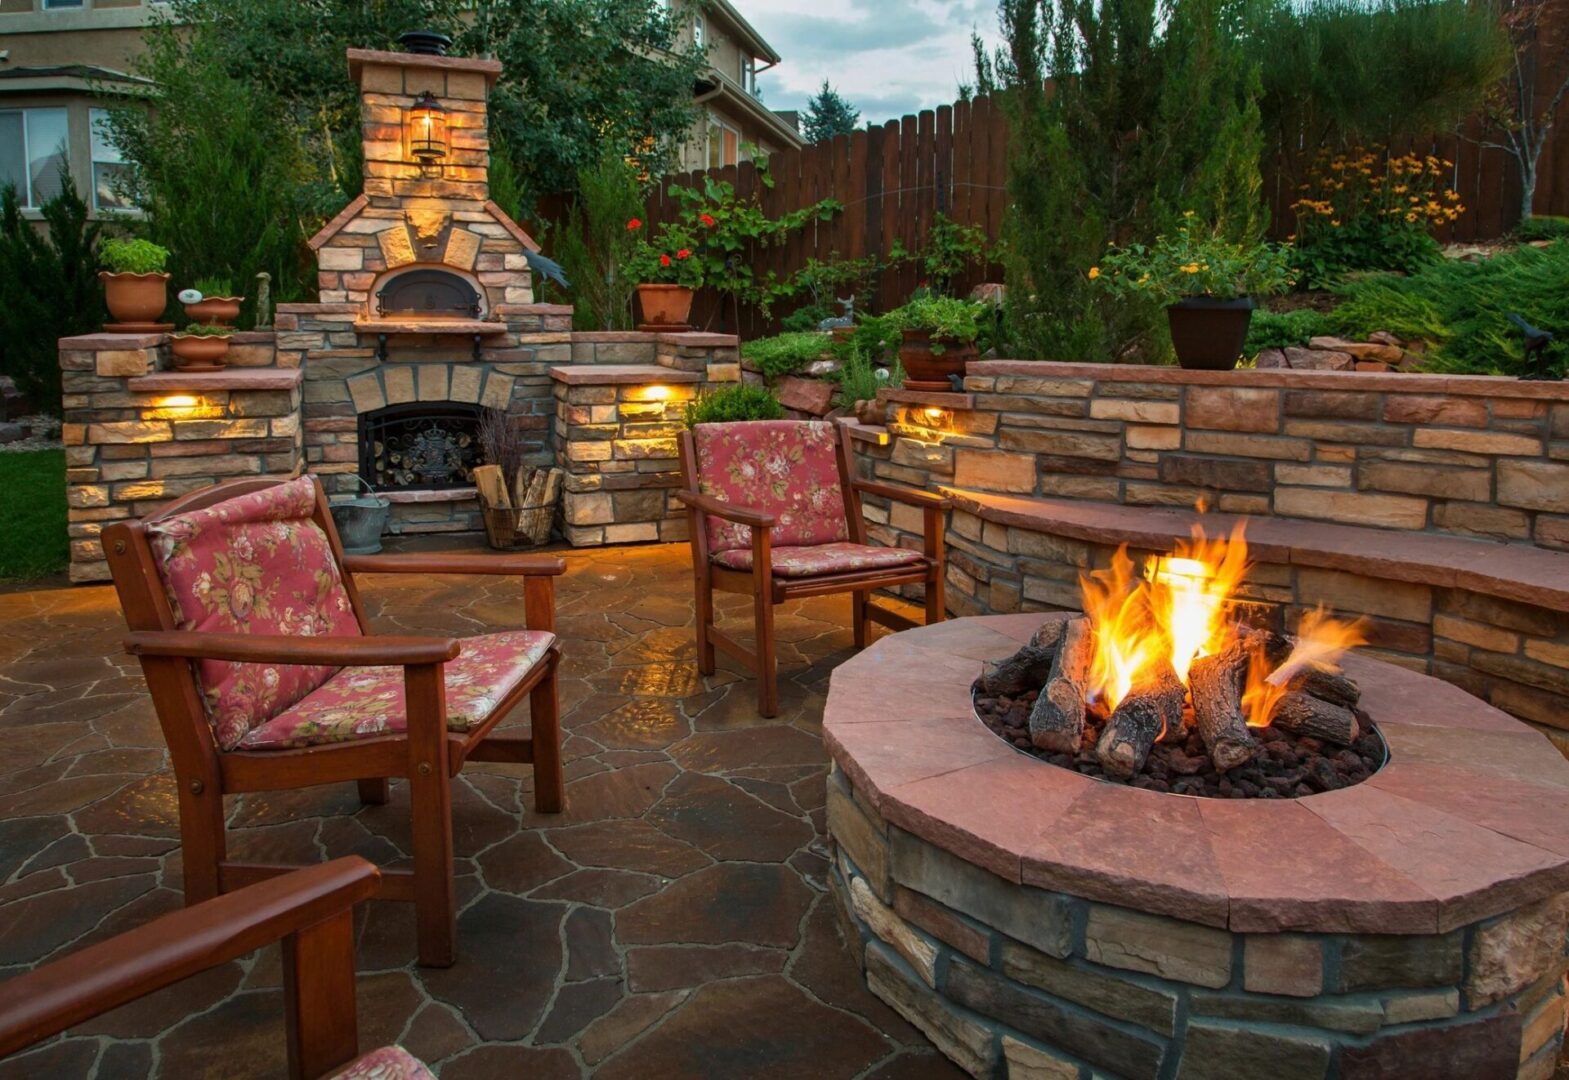 An Outdoor Space With a Fire Pit and Stone Railing